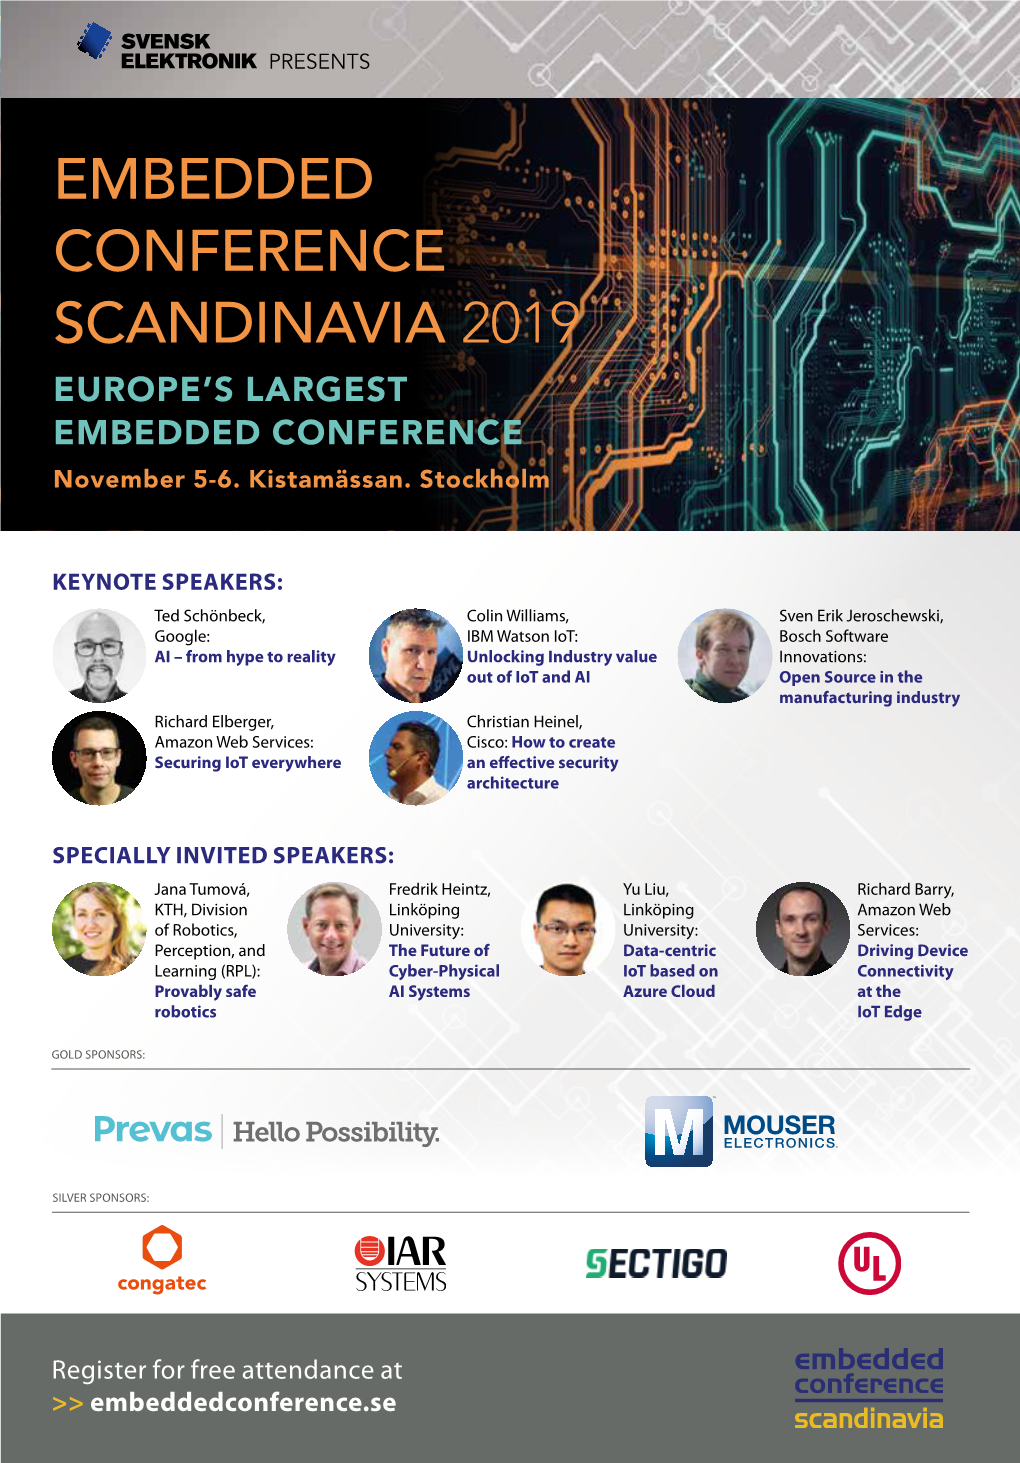 EMBEDDED CONFERENCE SCANDINAVIA 2019 EUROPE’S LARGEST EMBEDDED CONFERENCE November 5-6